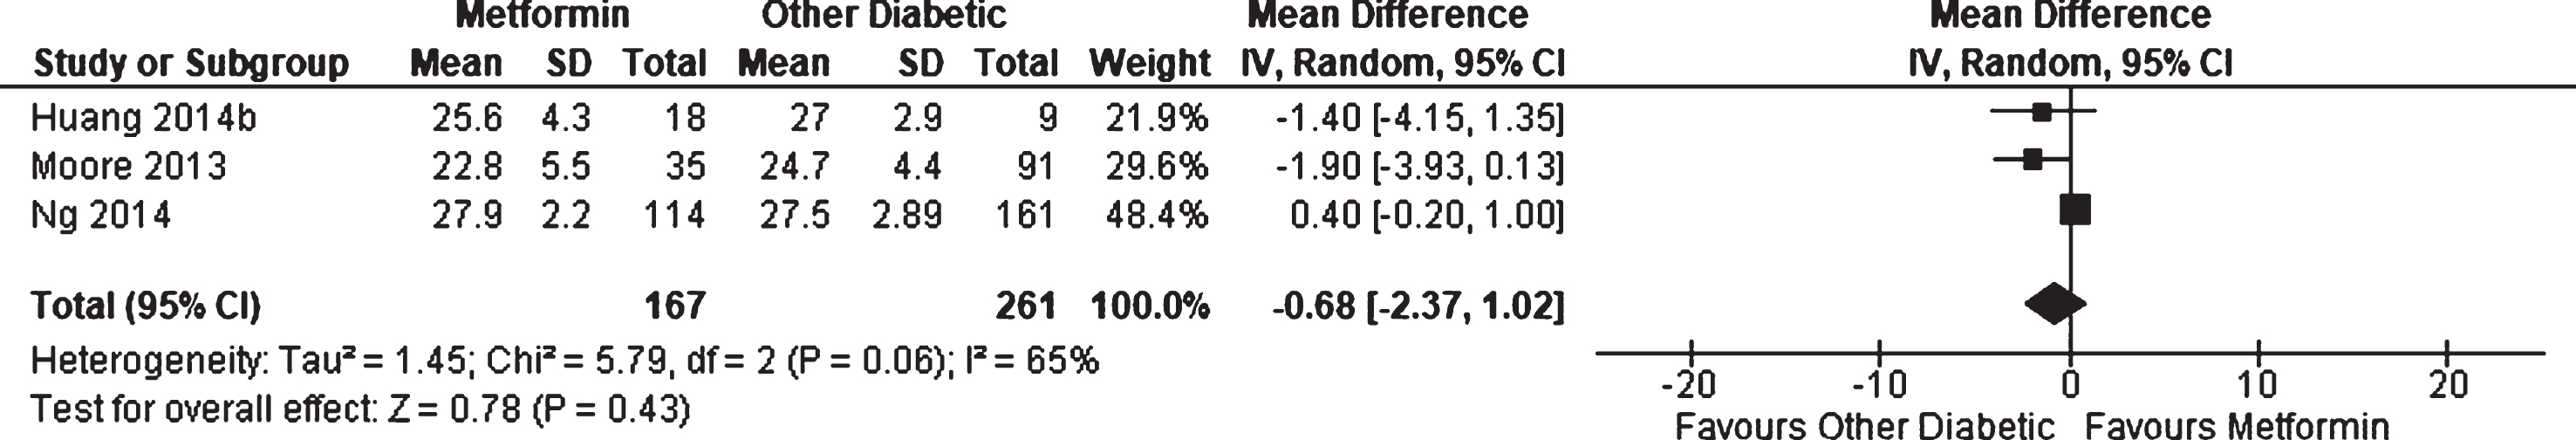 Weighted mean difference for Mini-Mental State Examination score in patients with diabetes receiving metformin compared to other patients with diabetes.